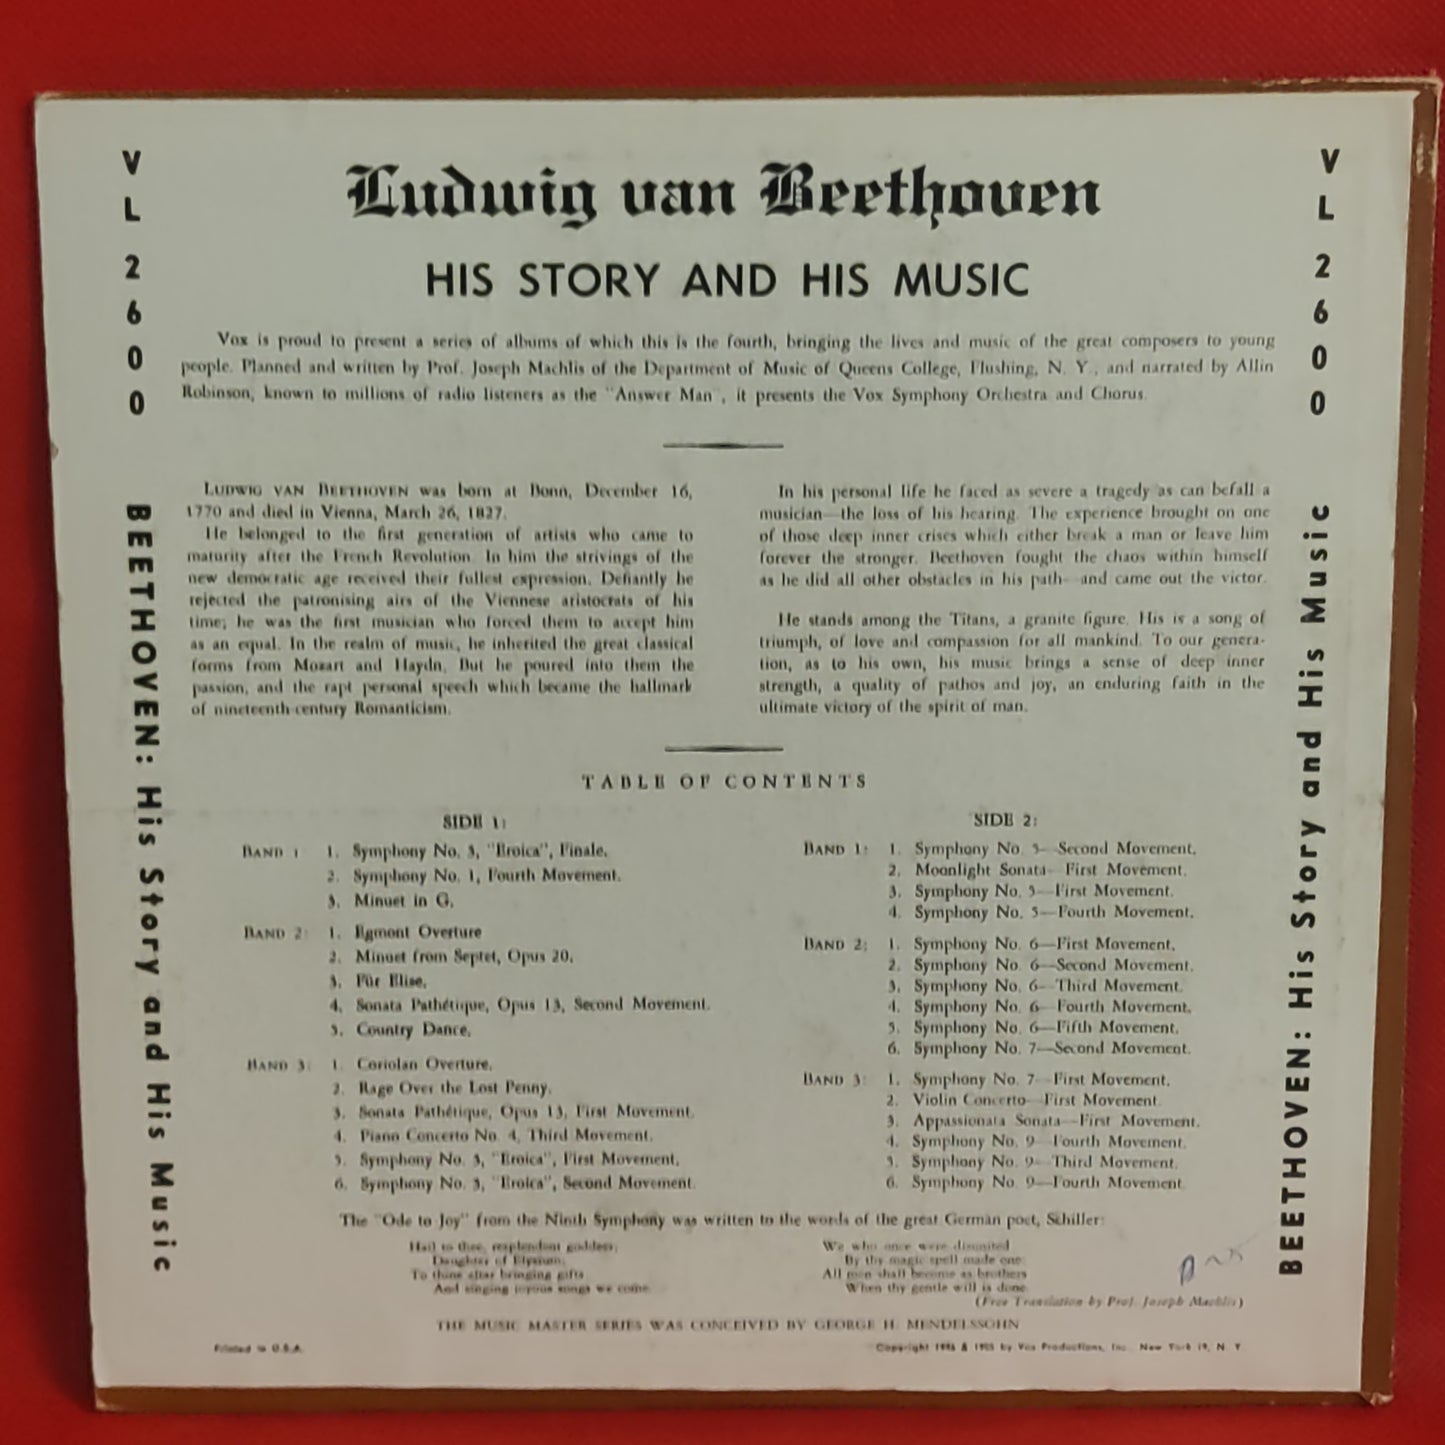 Ludwing van Beethoven - his story and his music